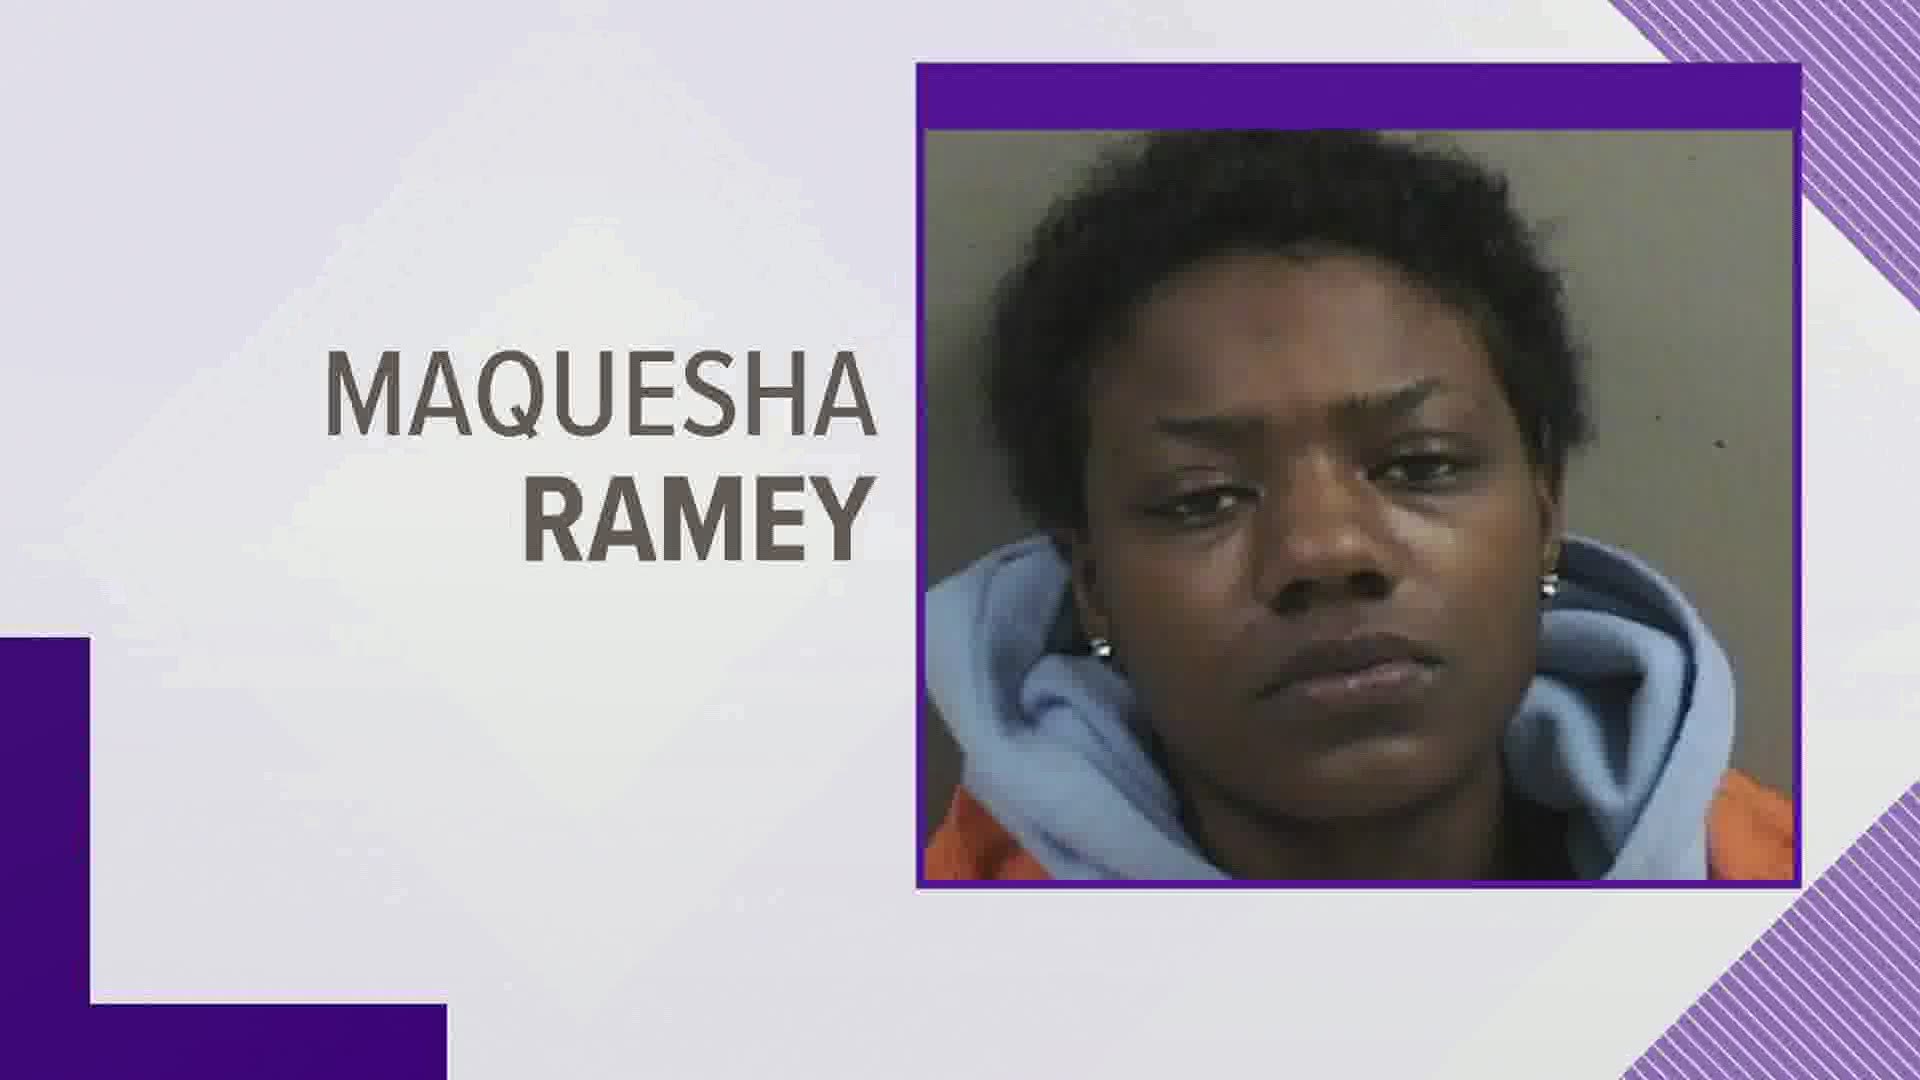 A 26-year-old woman has been accused in the shooting death of another 26-year-old woman in Galesburg on Monday, January 4.